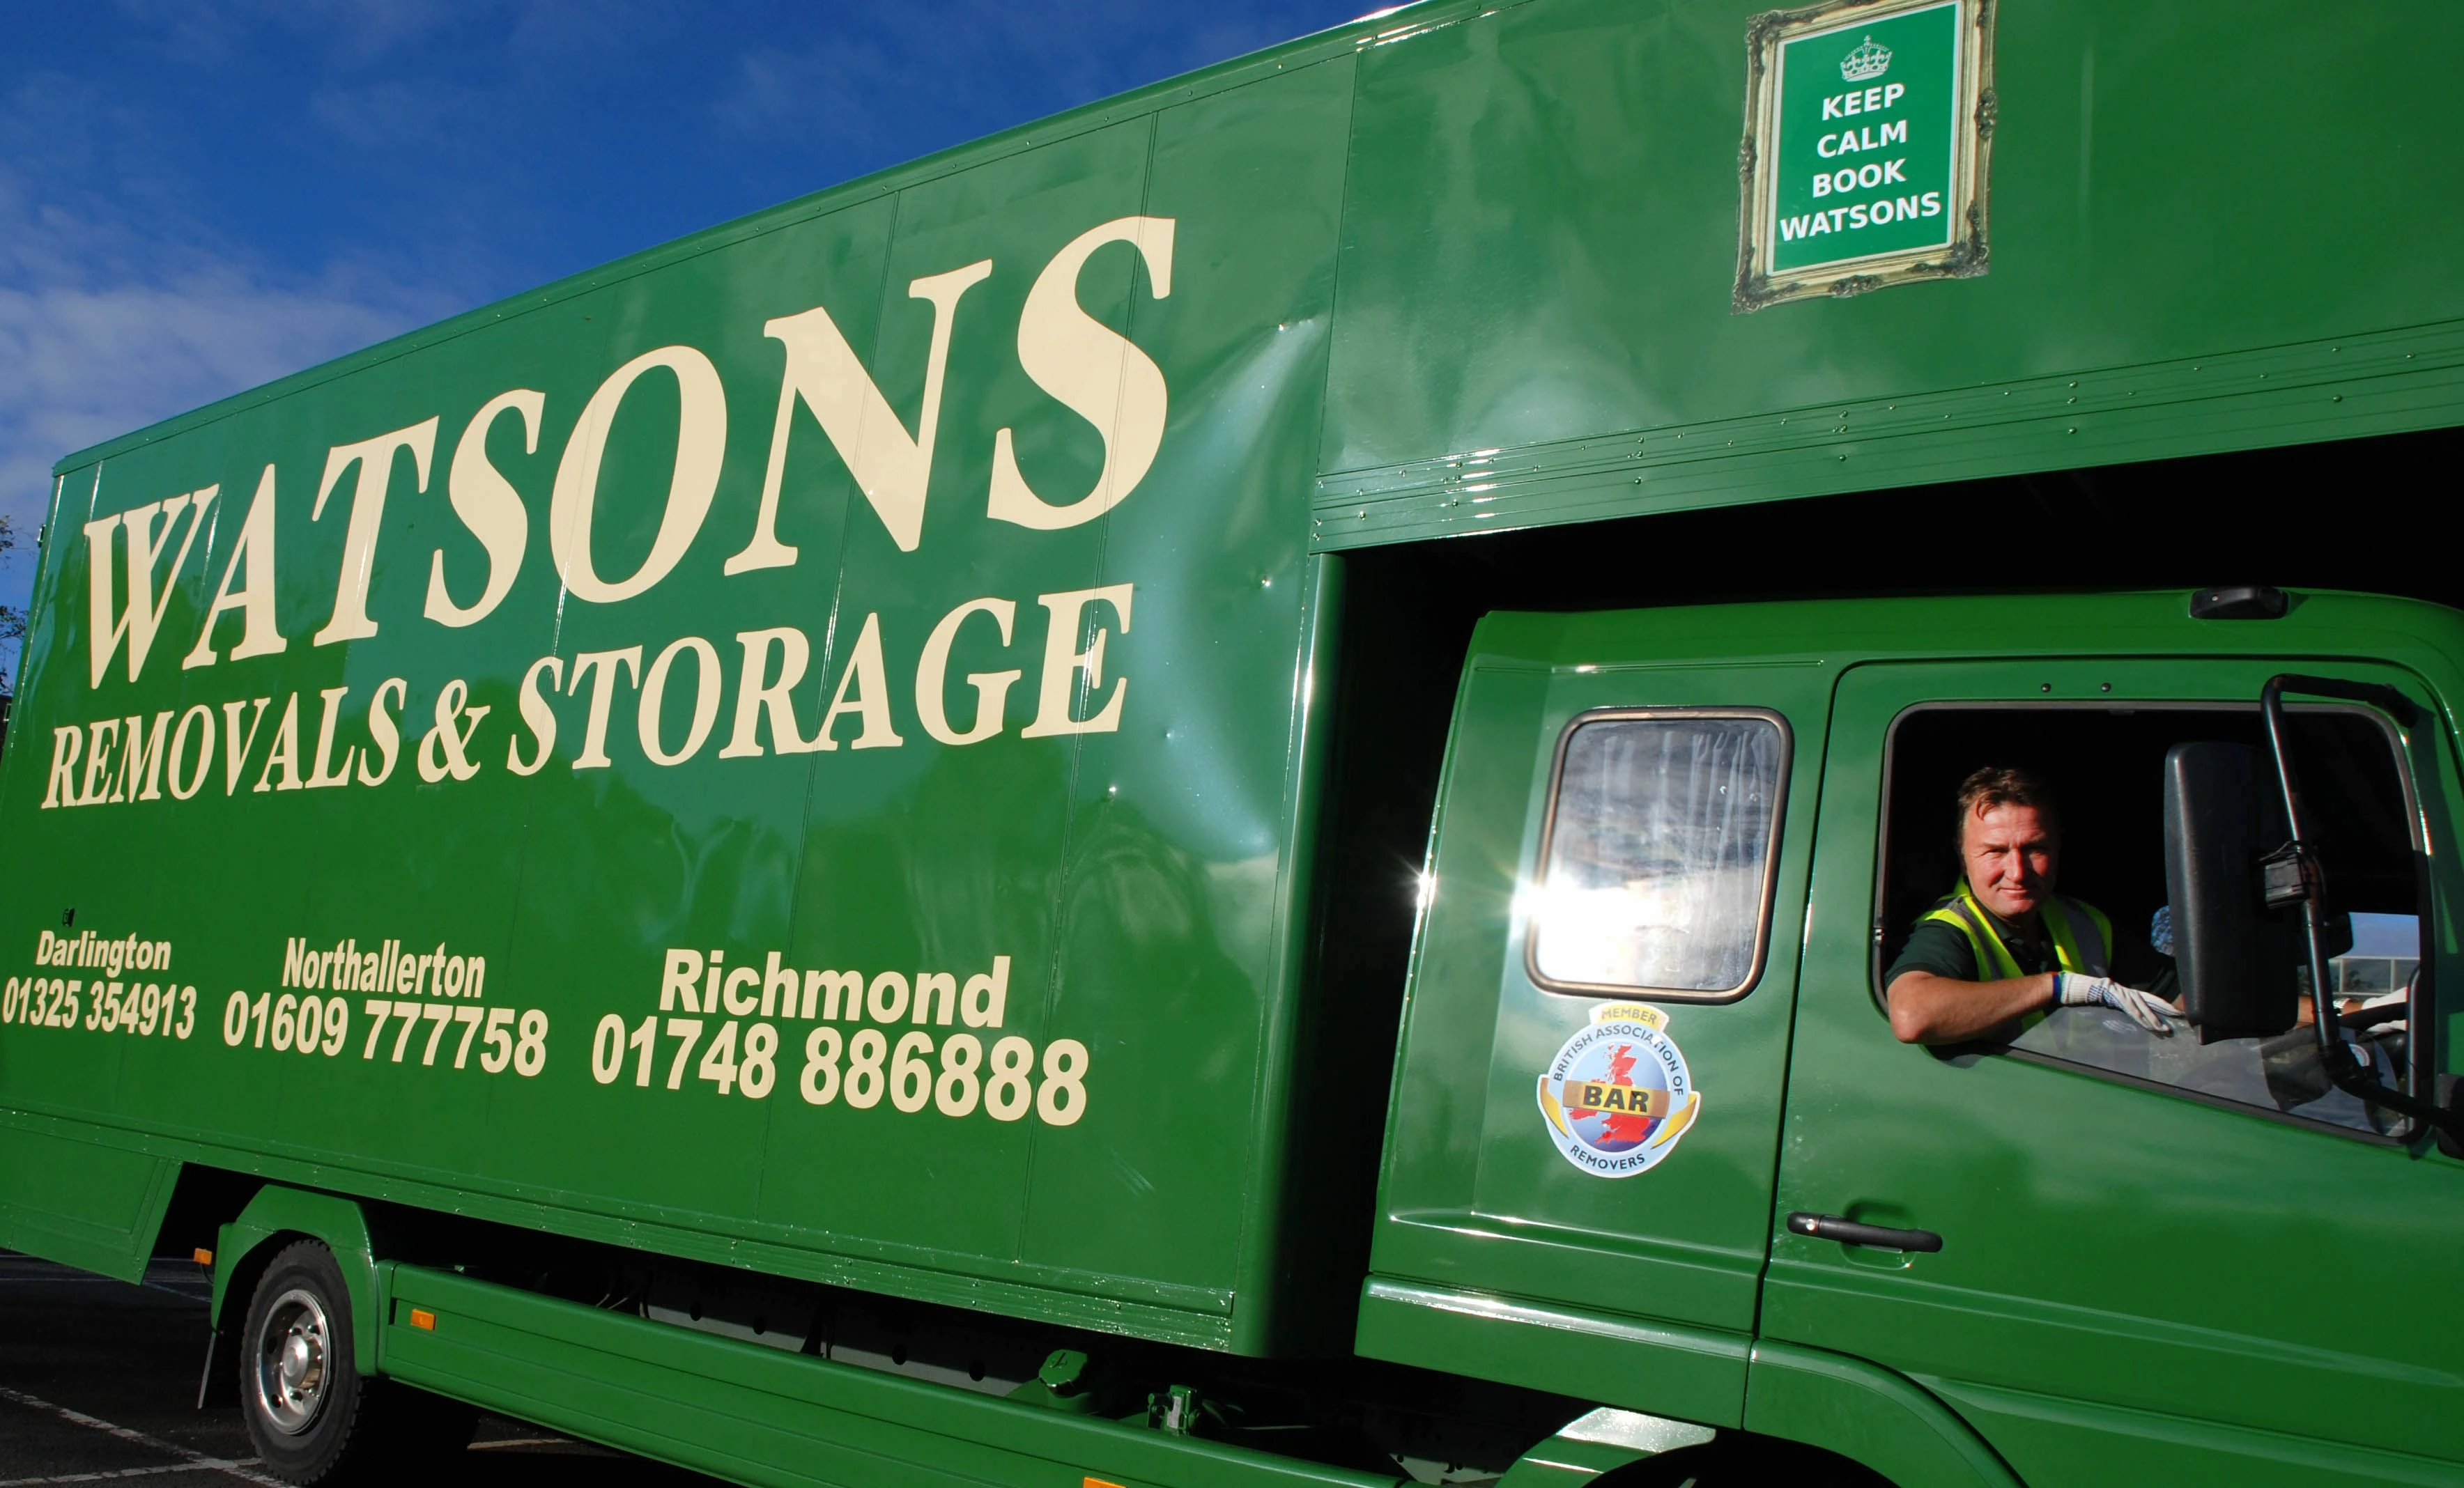 Removal firm picks up major new contract